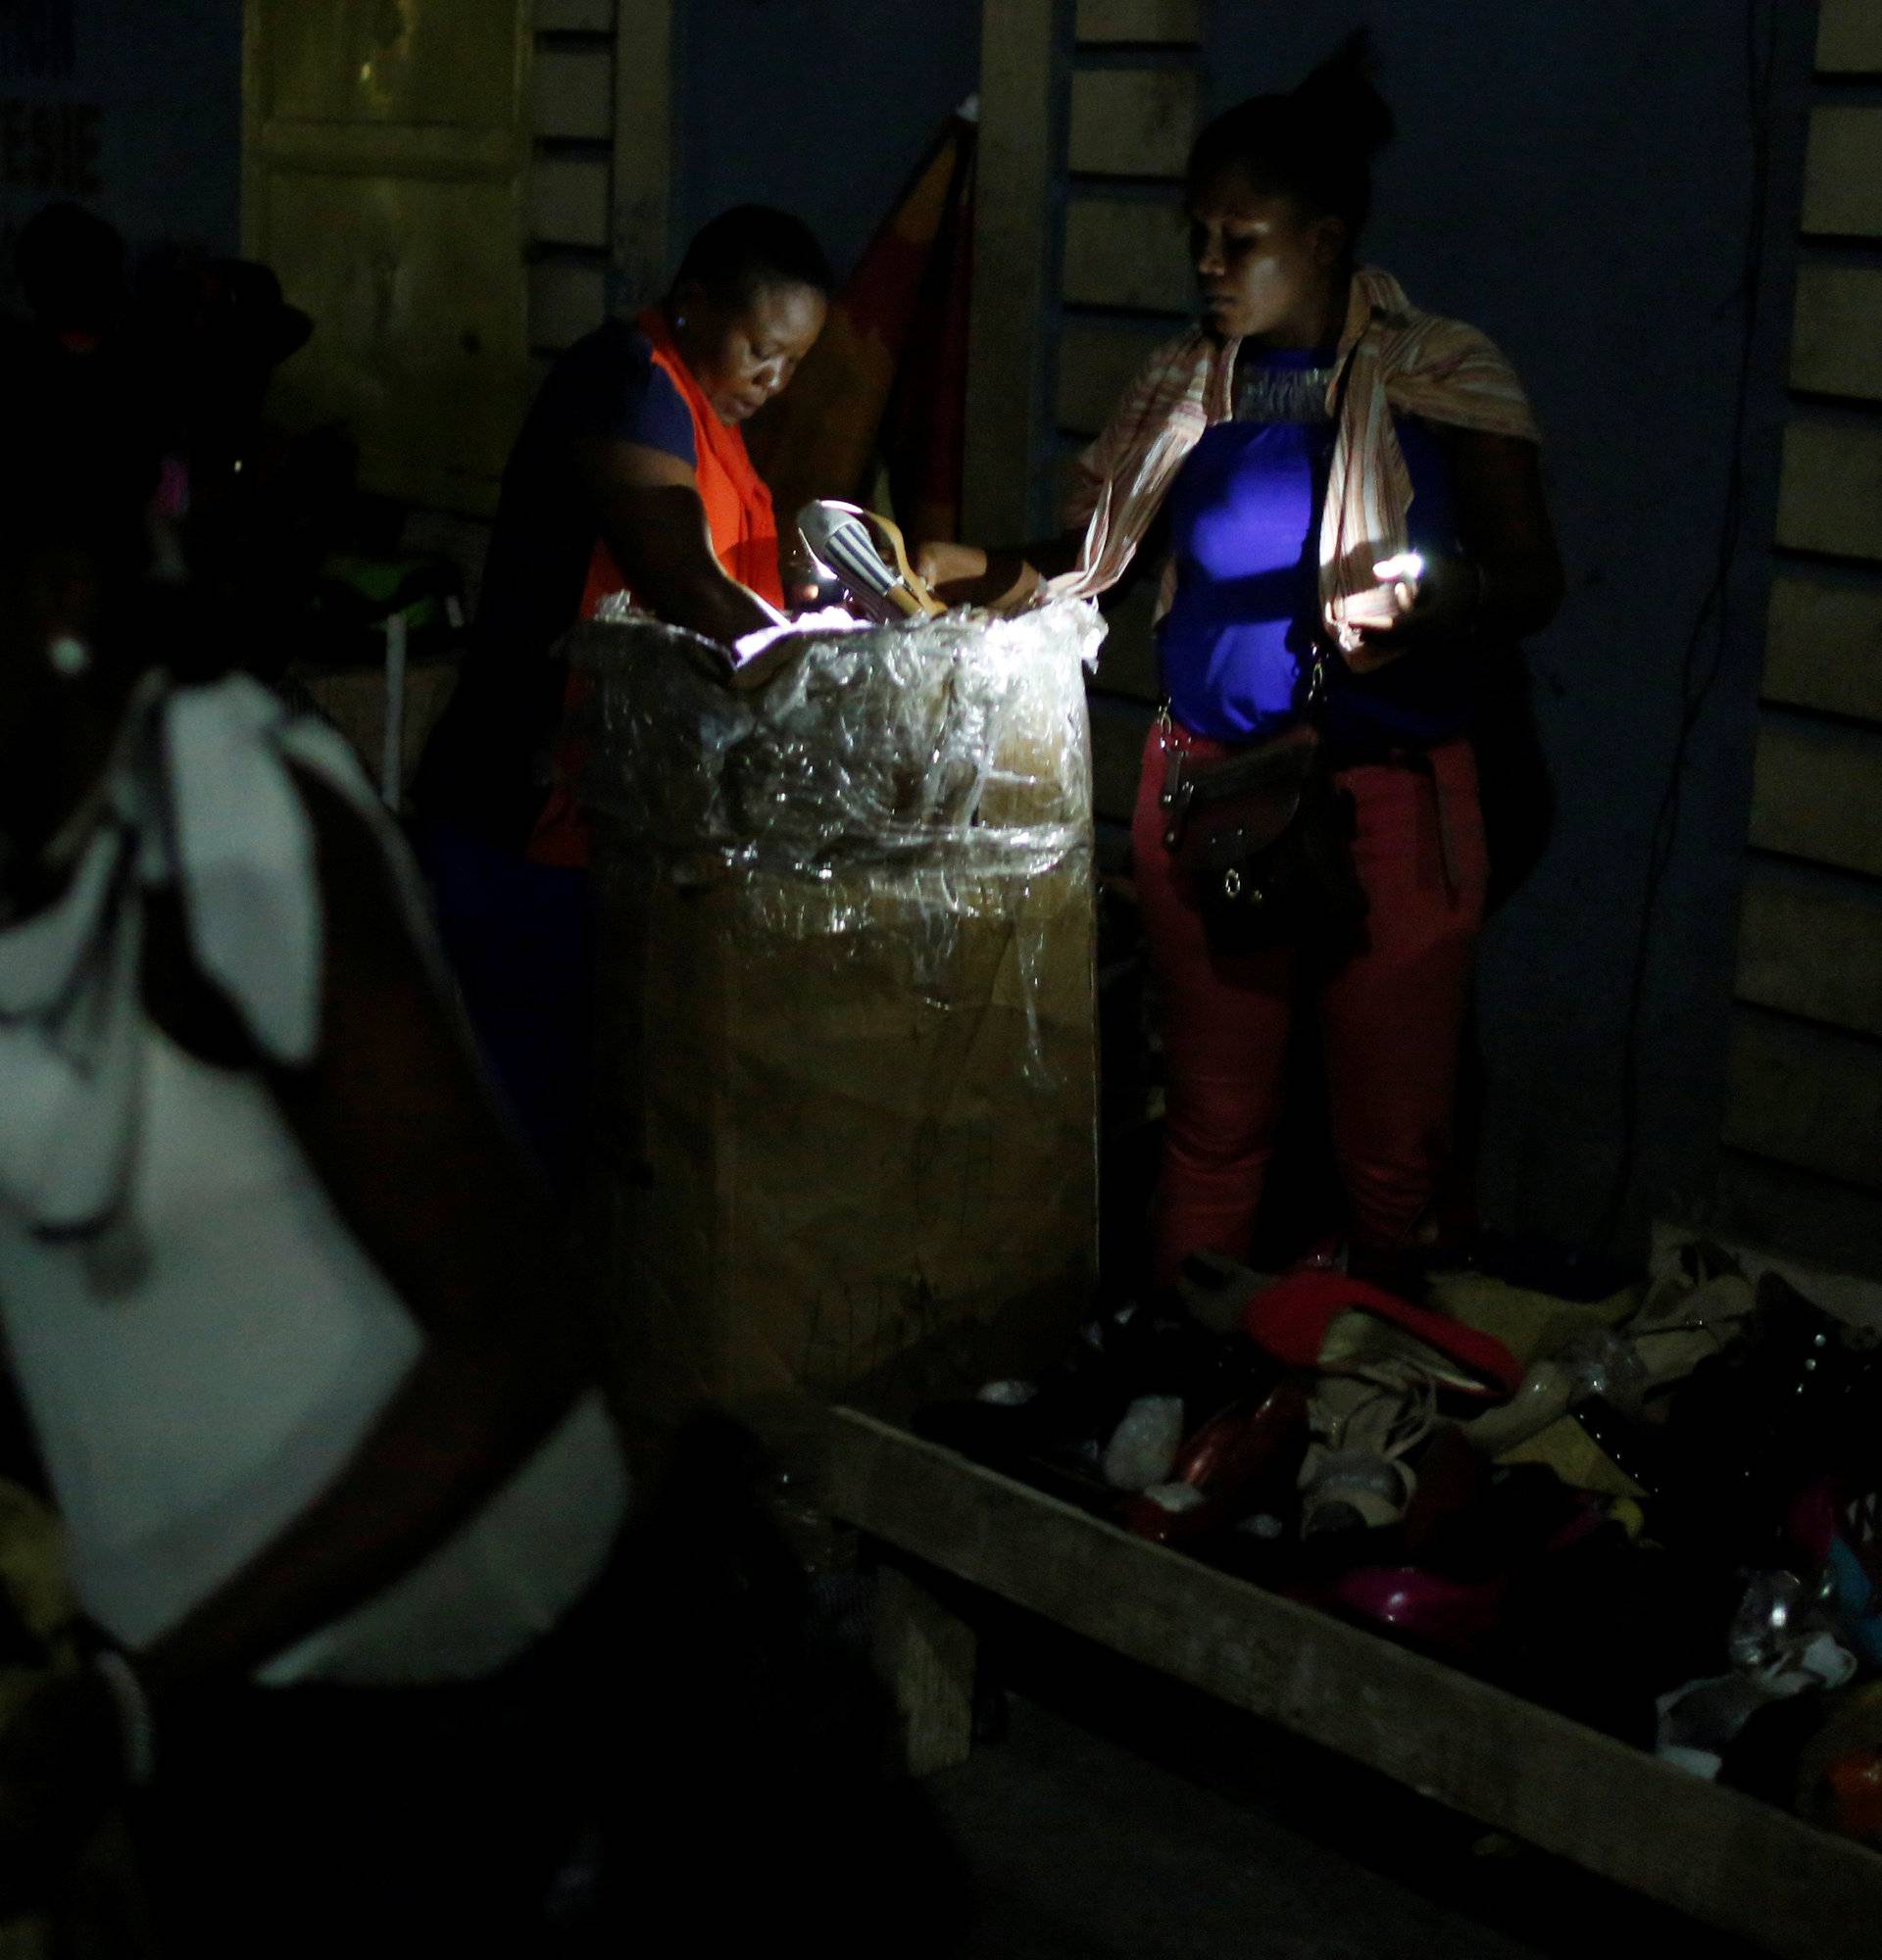 Vendors sell their goods on a street market while Hurricane Matthew approaches in Port-au-Prince, Haiti